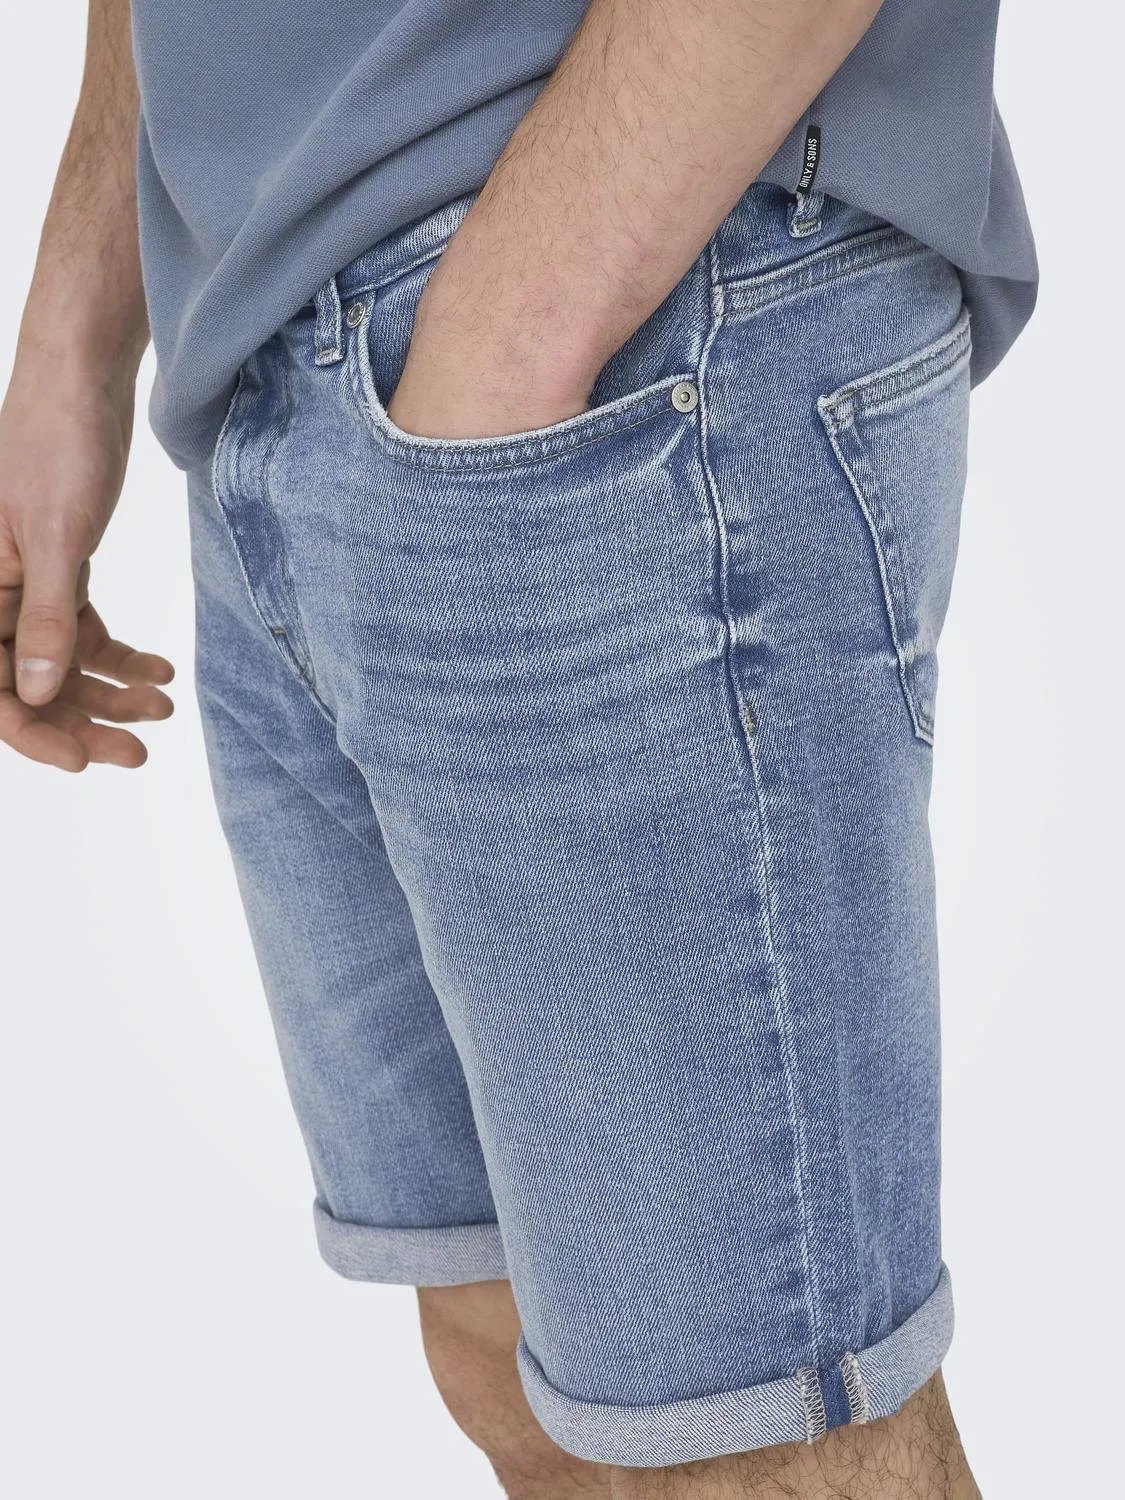 ONLY & SONS Shorts ONSPLY MBD 8772 TAI DNM SHORTS NOOS günstig online kaufen